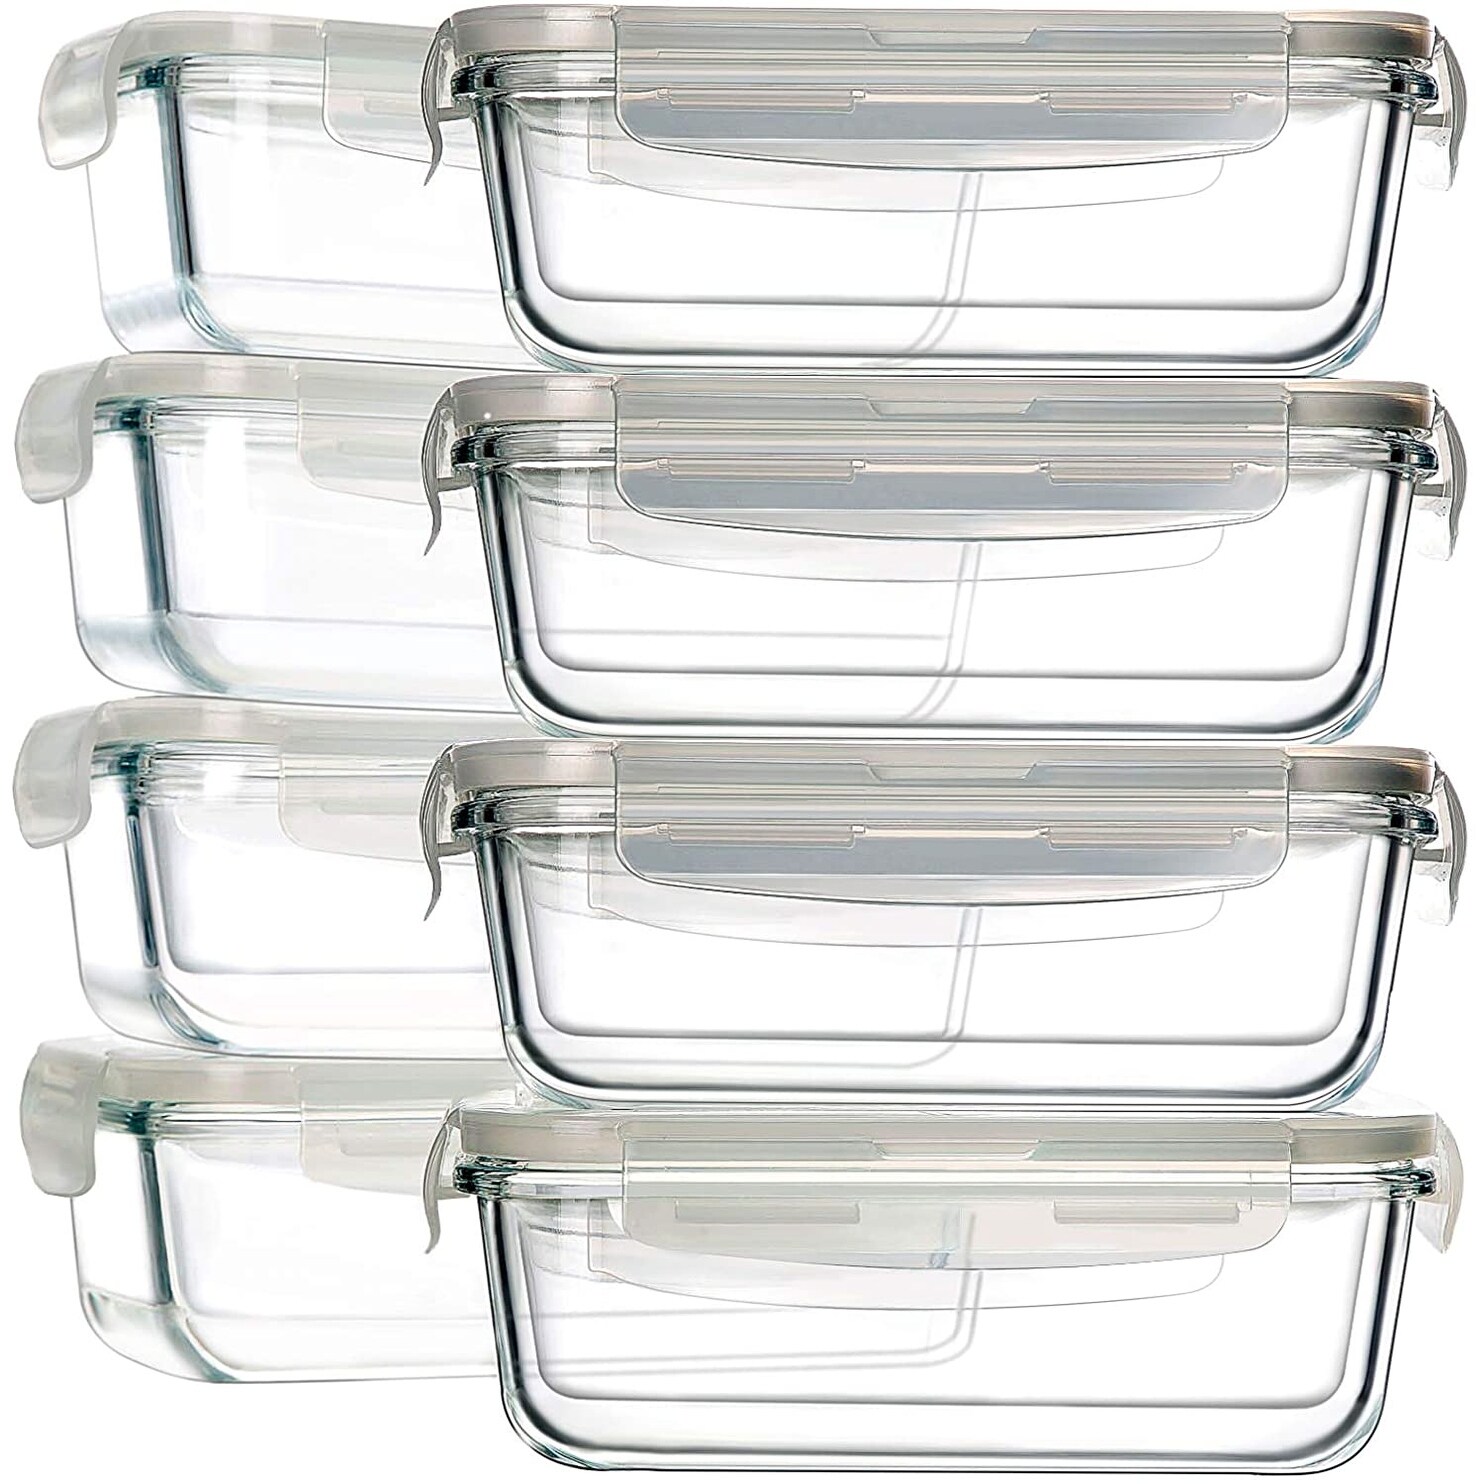 https://ak1.ostkcdn.com/images/products/is/images/direct/9be0a437e57ae56439a17a30cb042f84cad4a3f4/8Pack-Glass-Food-Storage-Containers%2CGlass-Meal-PrepContainers%2C-Airtight-GlassStorage-Containers-with-LidsBPAFree-Leak-Proof30oz.jpg